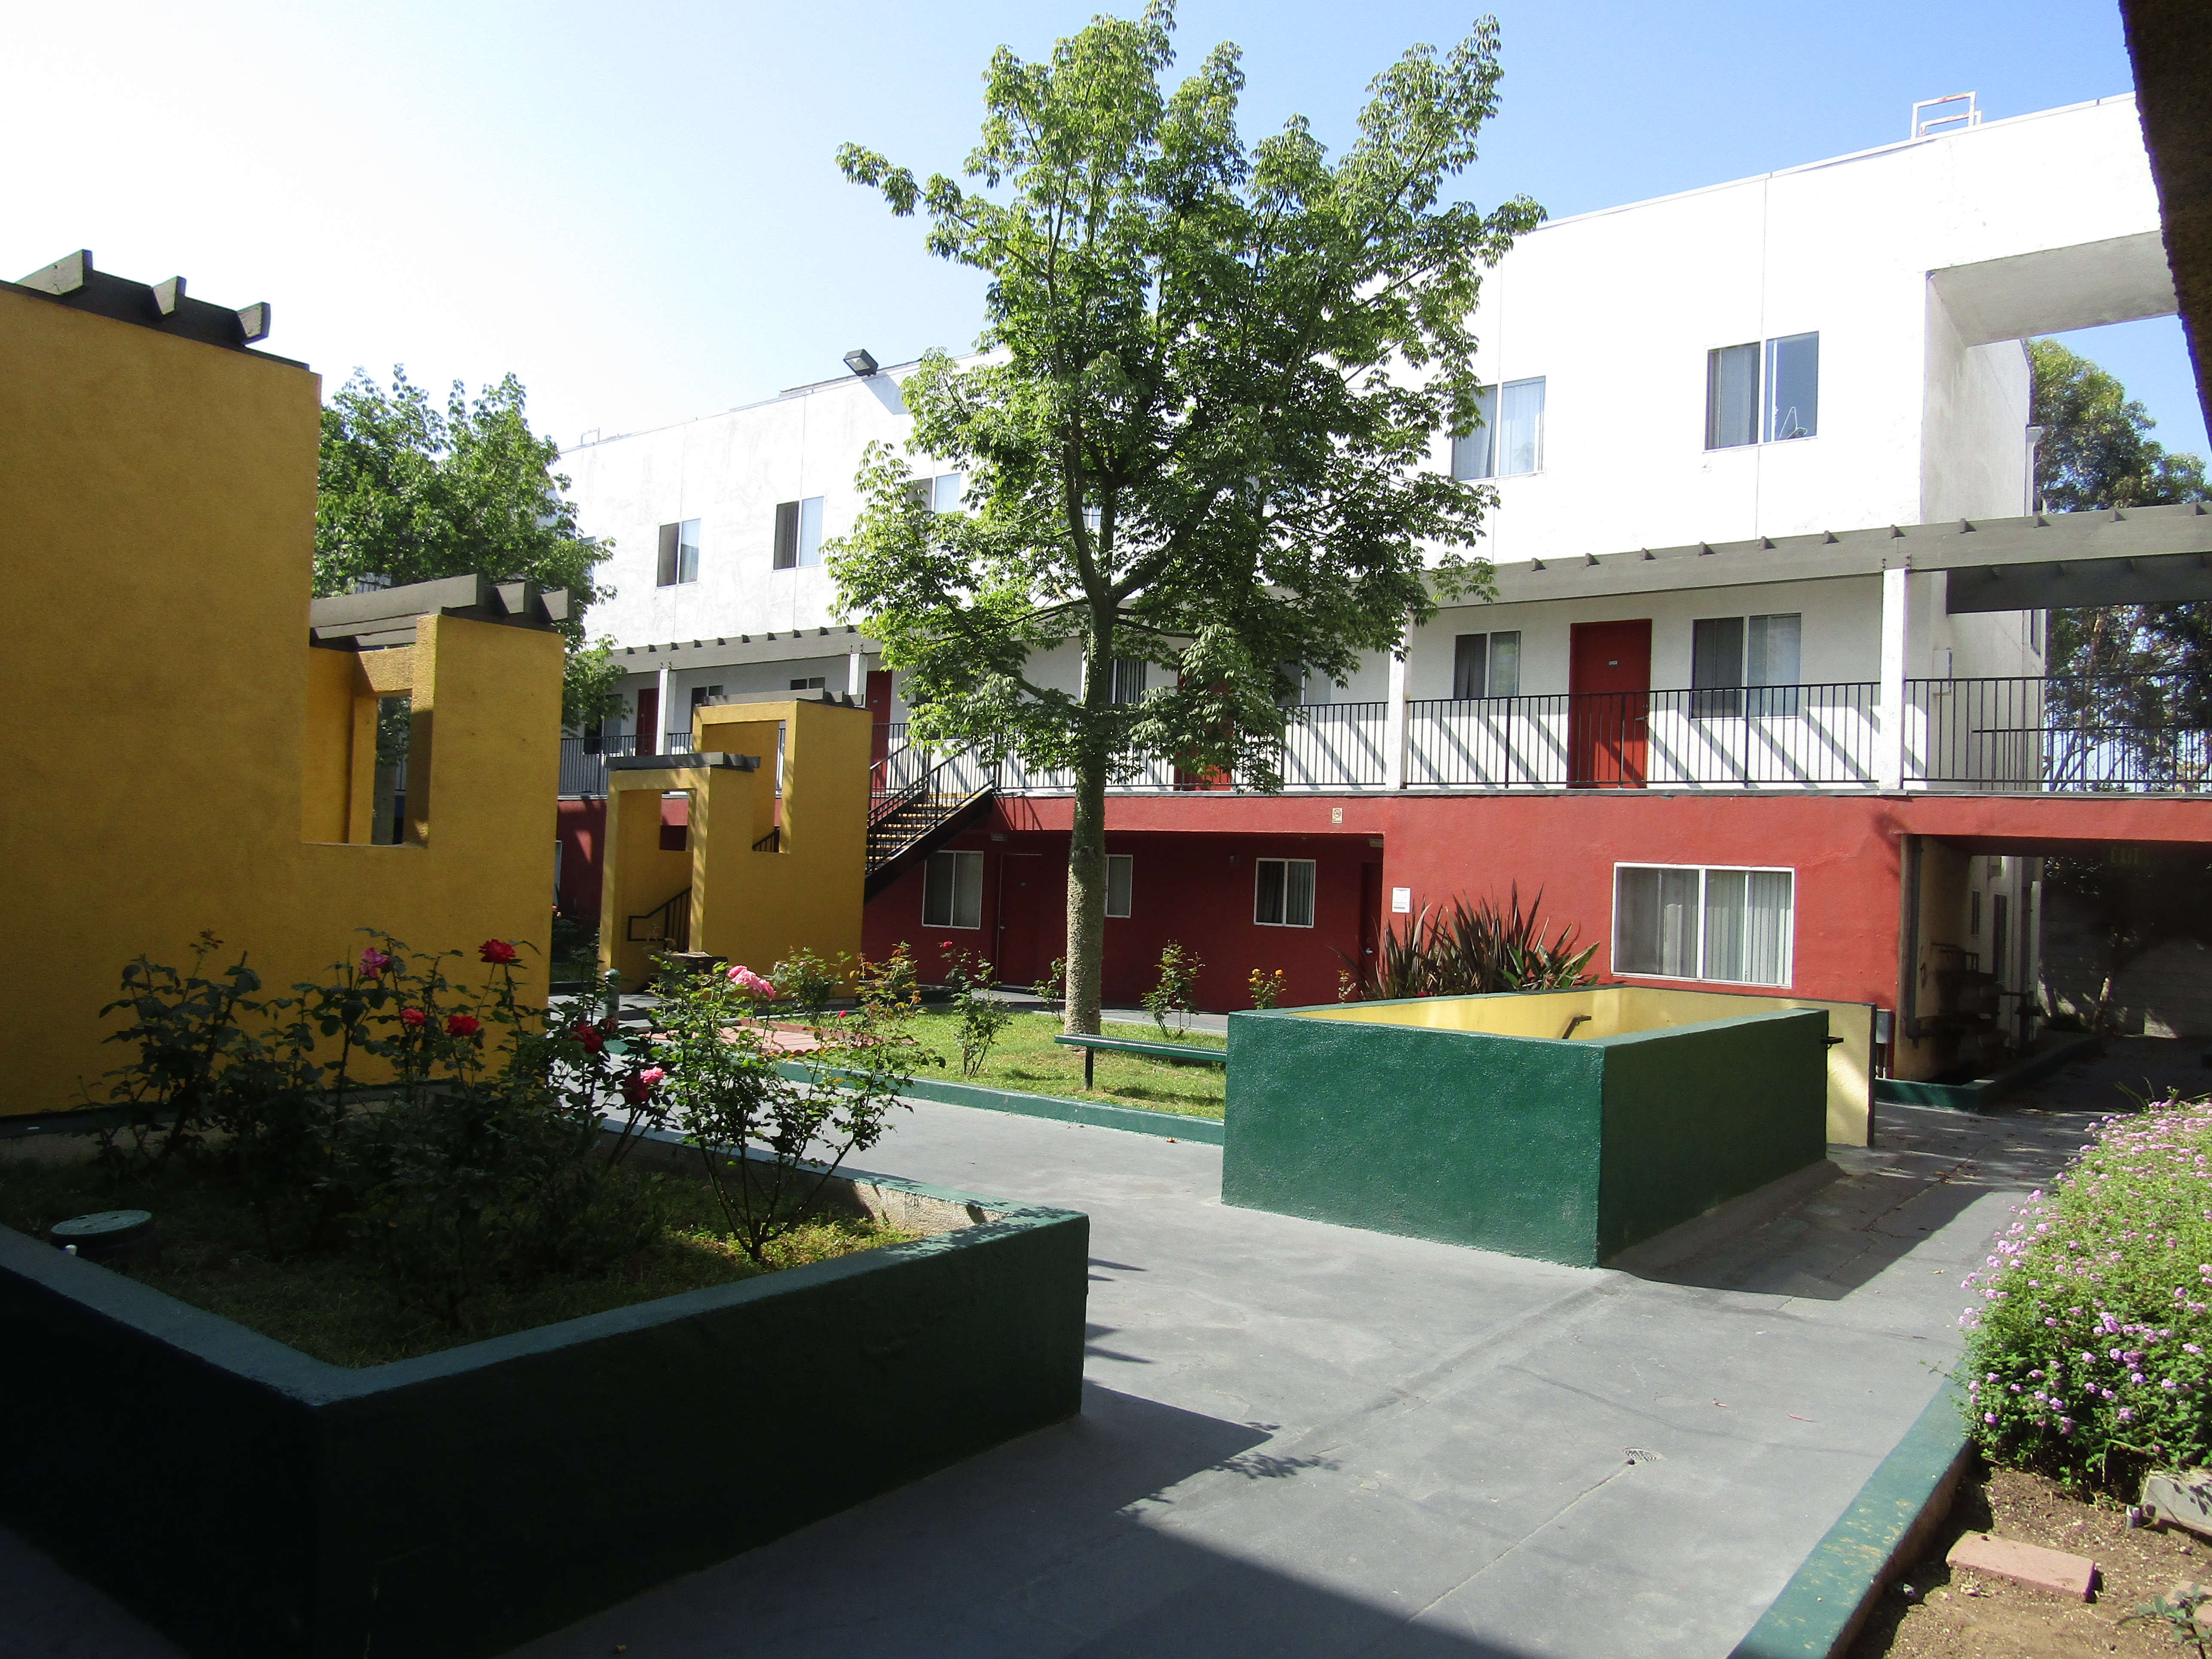 Image of the building courtyard